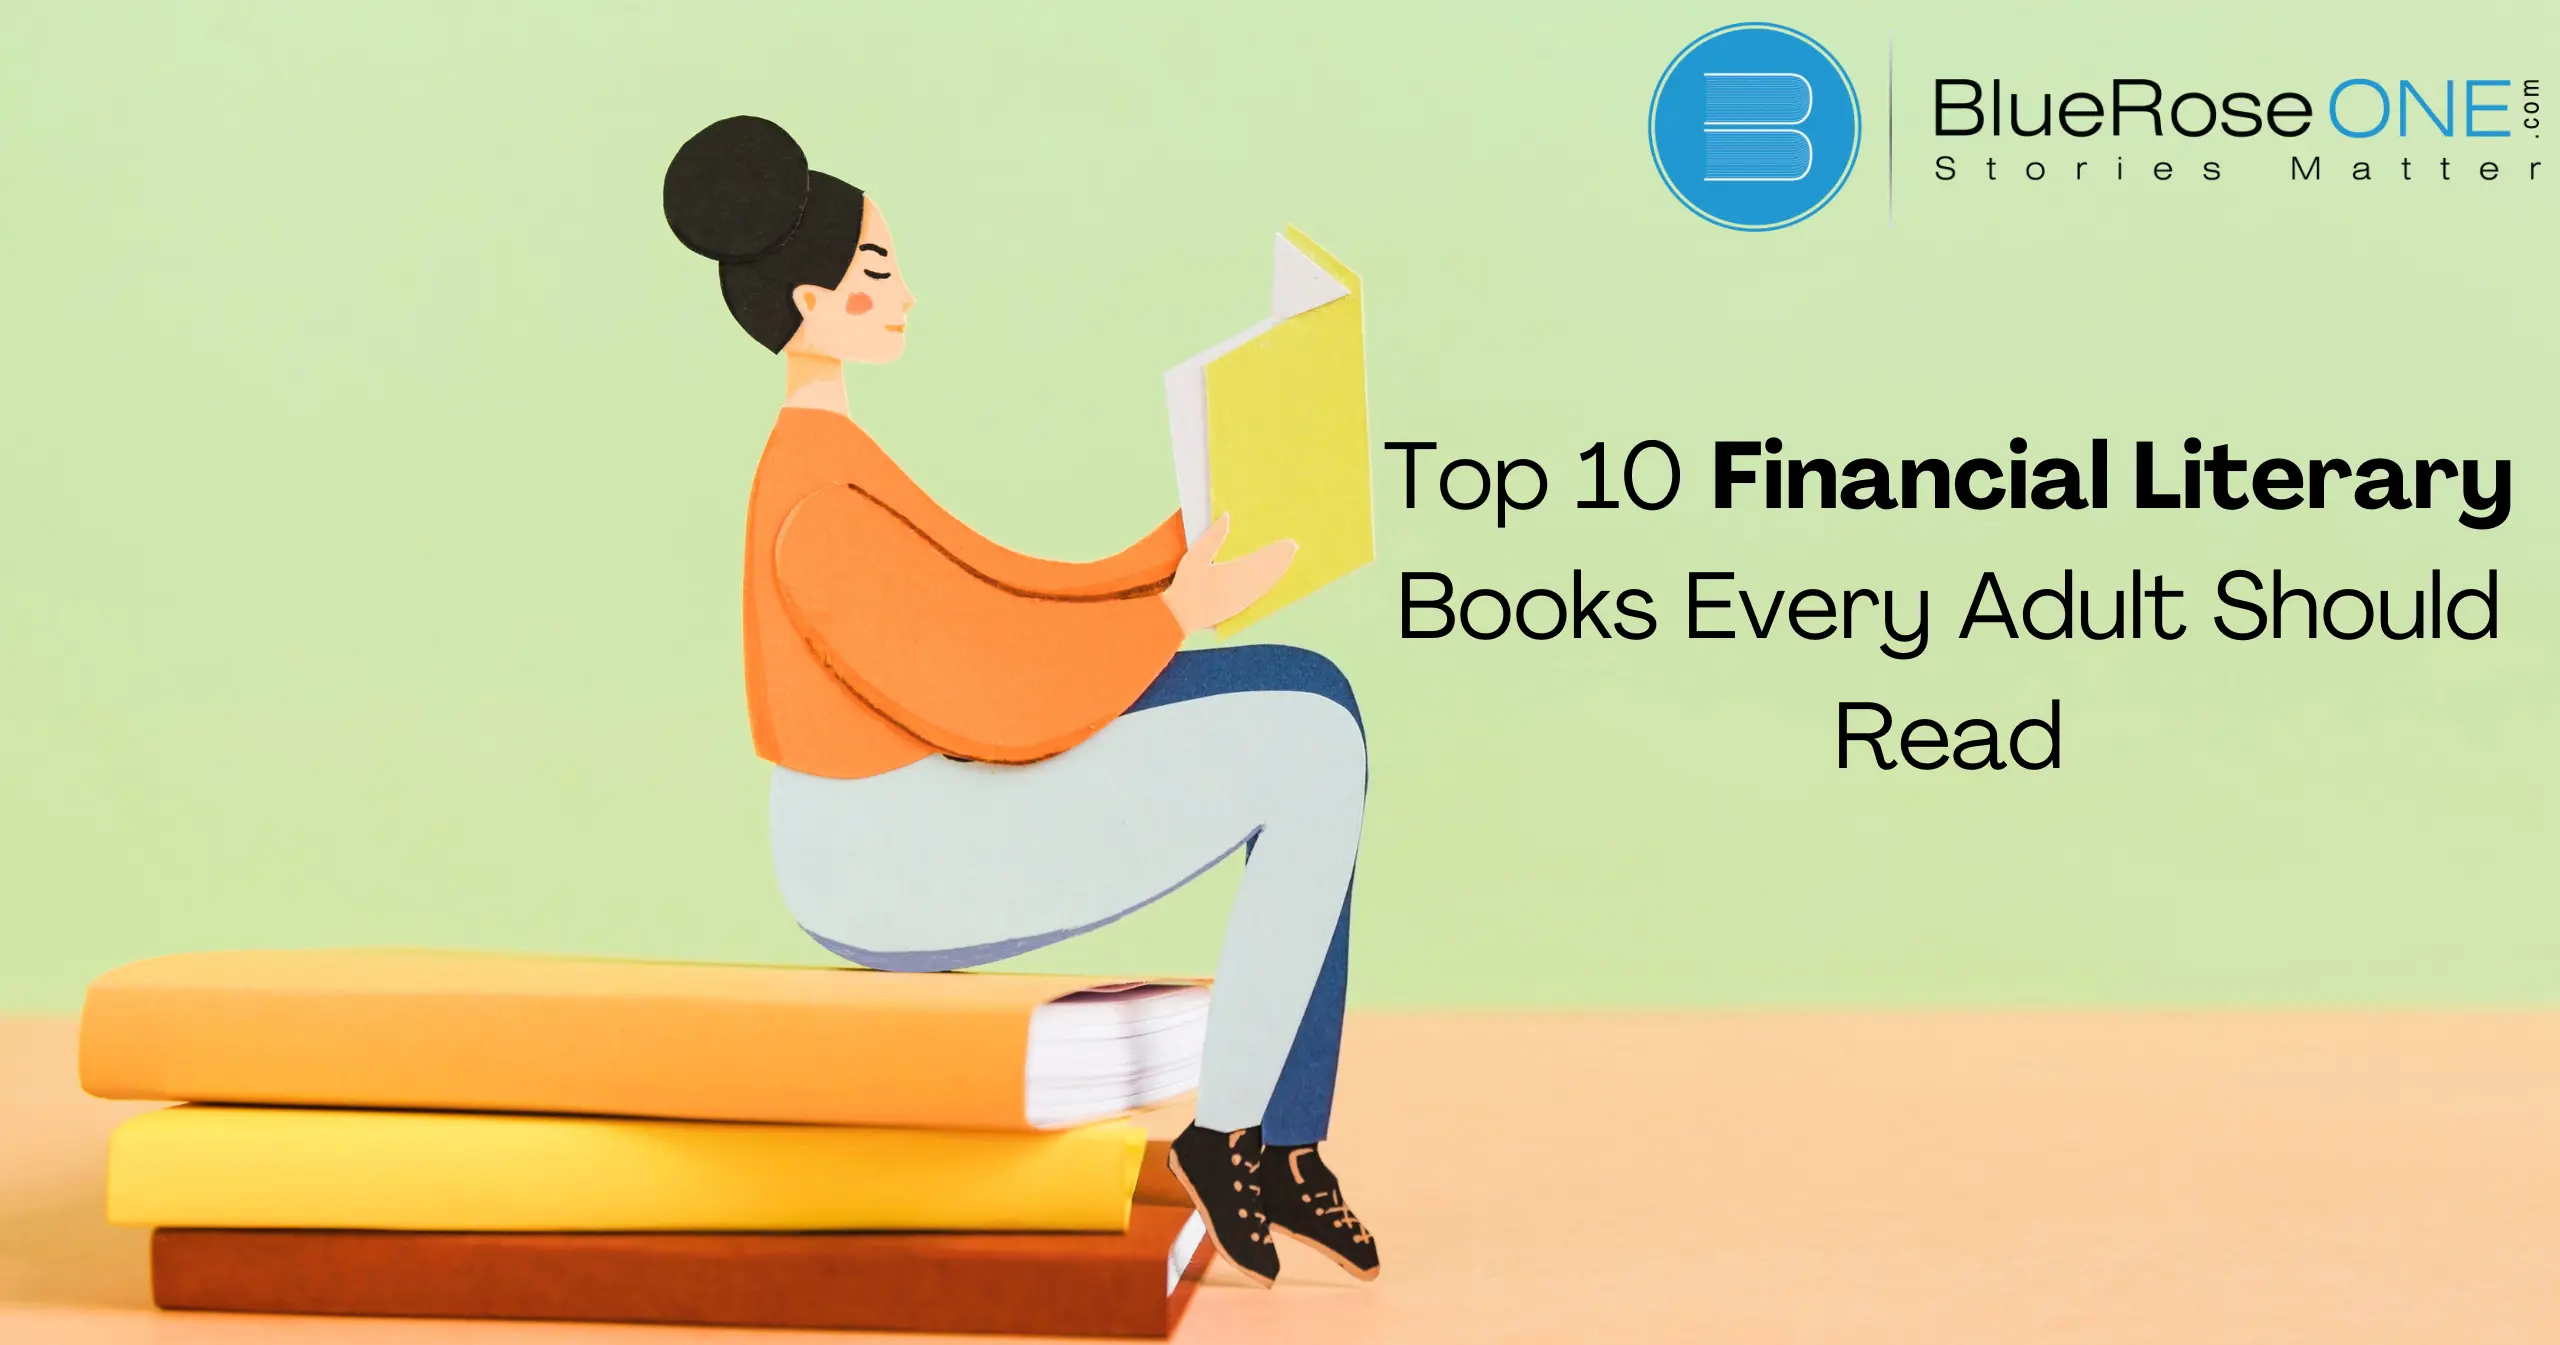 Top 10 Financial Literacy Books Every Adult Should Read